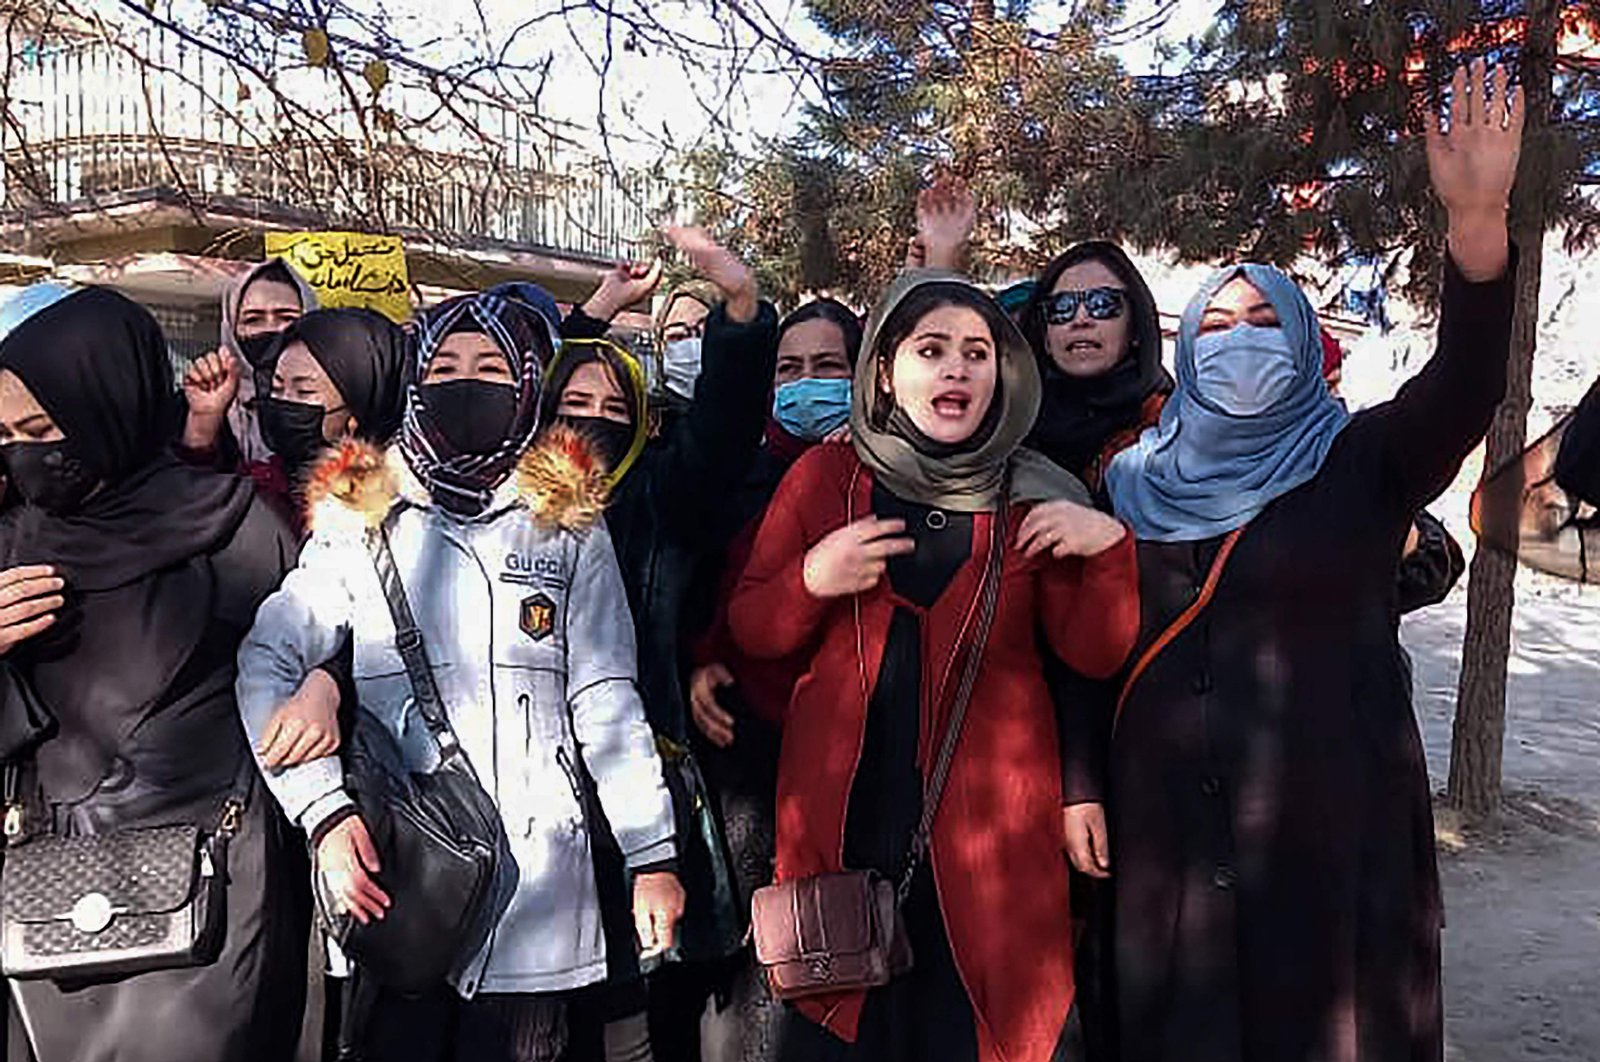 Afghan women chant slogans to protest against the ban on university education for women, in Kabul, Afghanistan, Dec. 22, 2022. (AFP Photo)